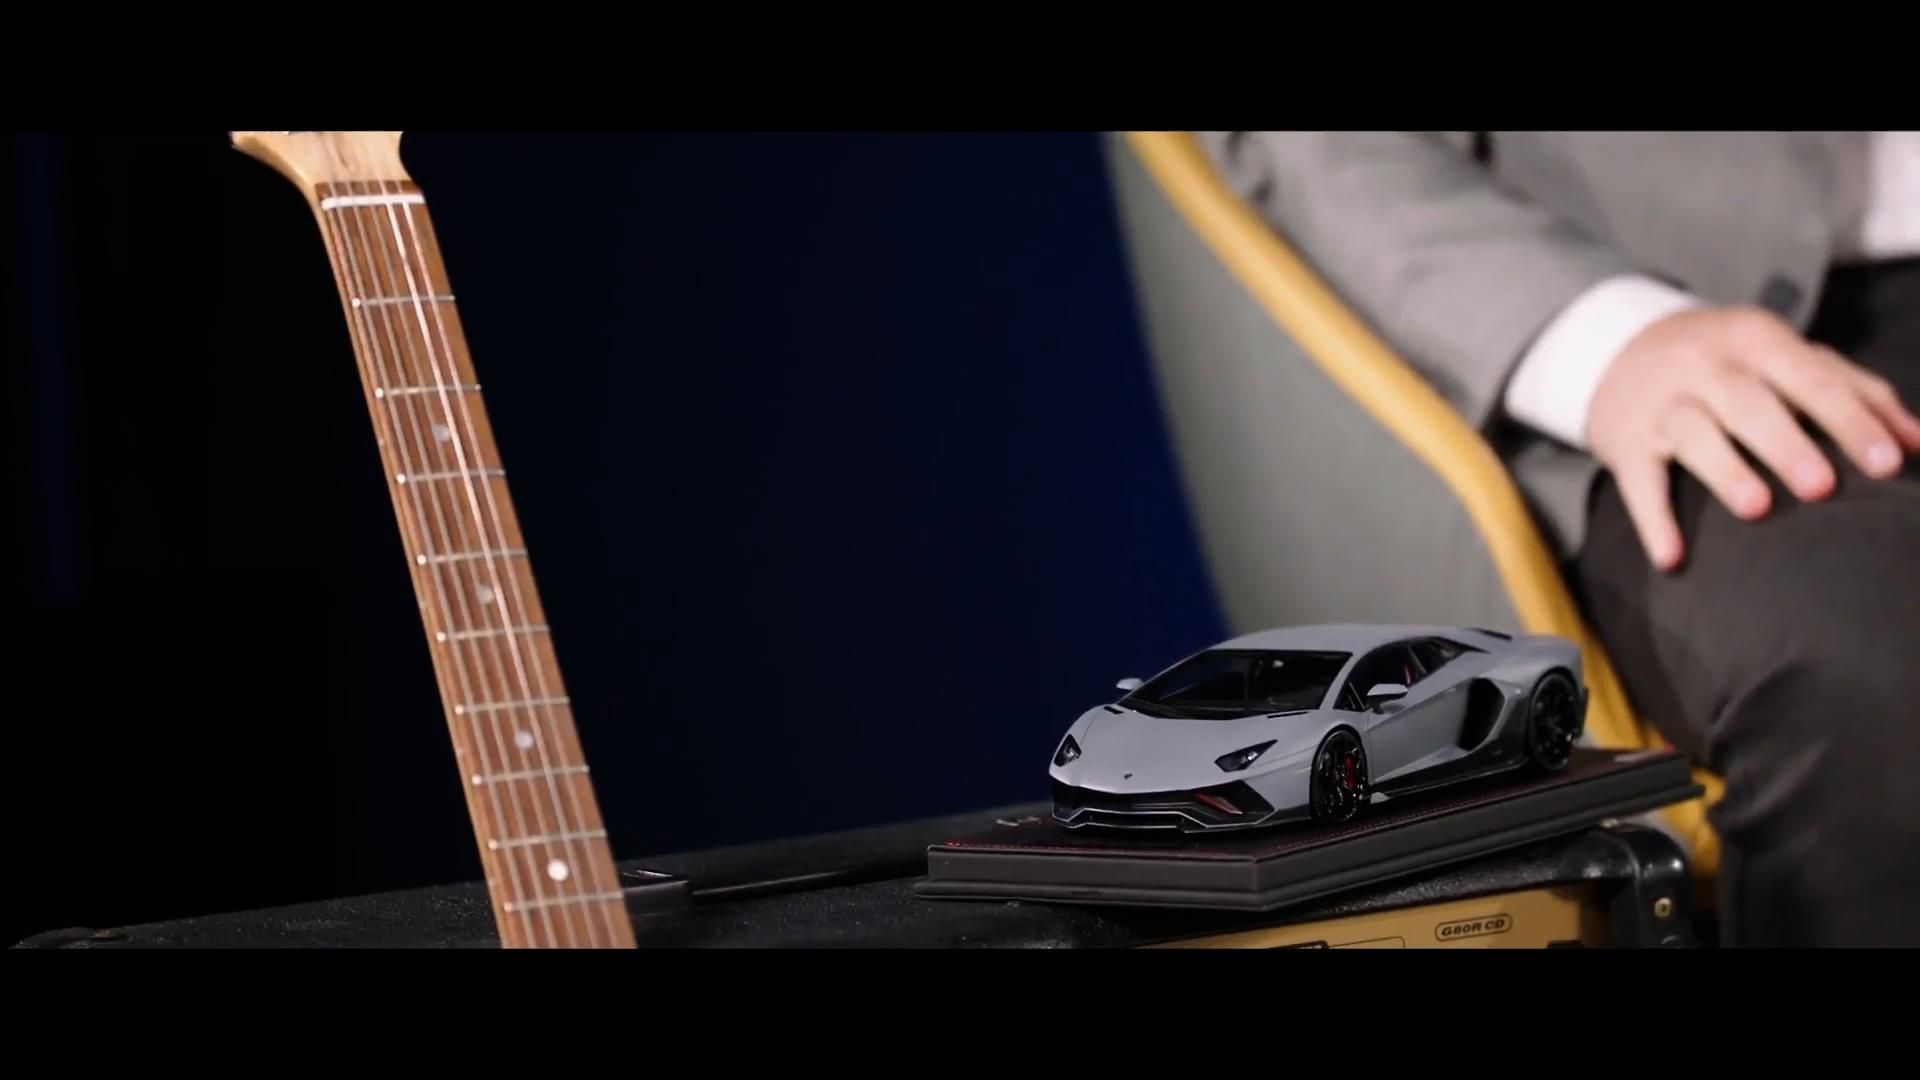 A scale model of a grey Lamborghini Aventador next to the neck of an electric guitar.